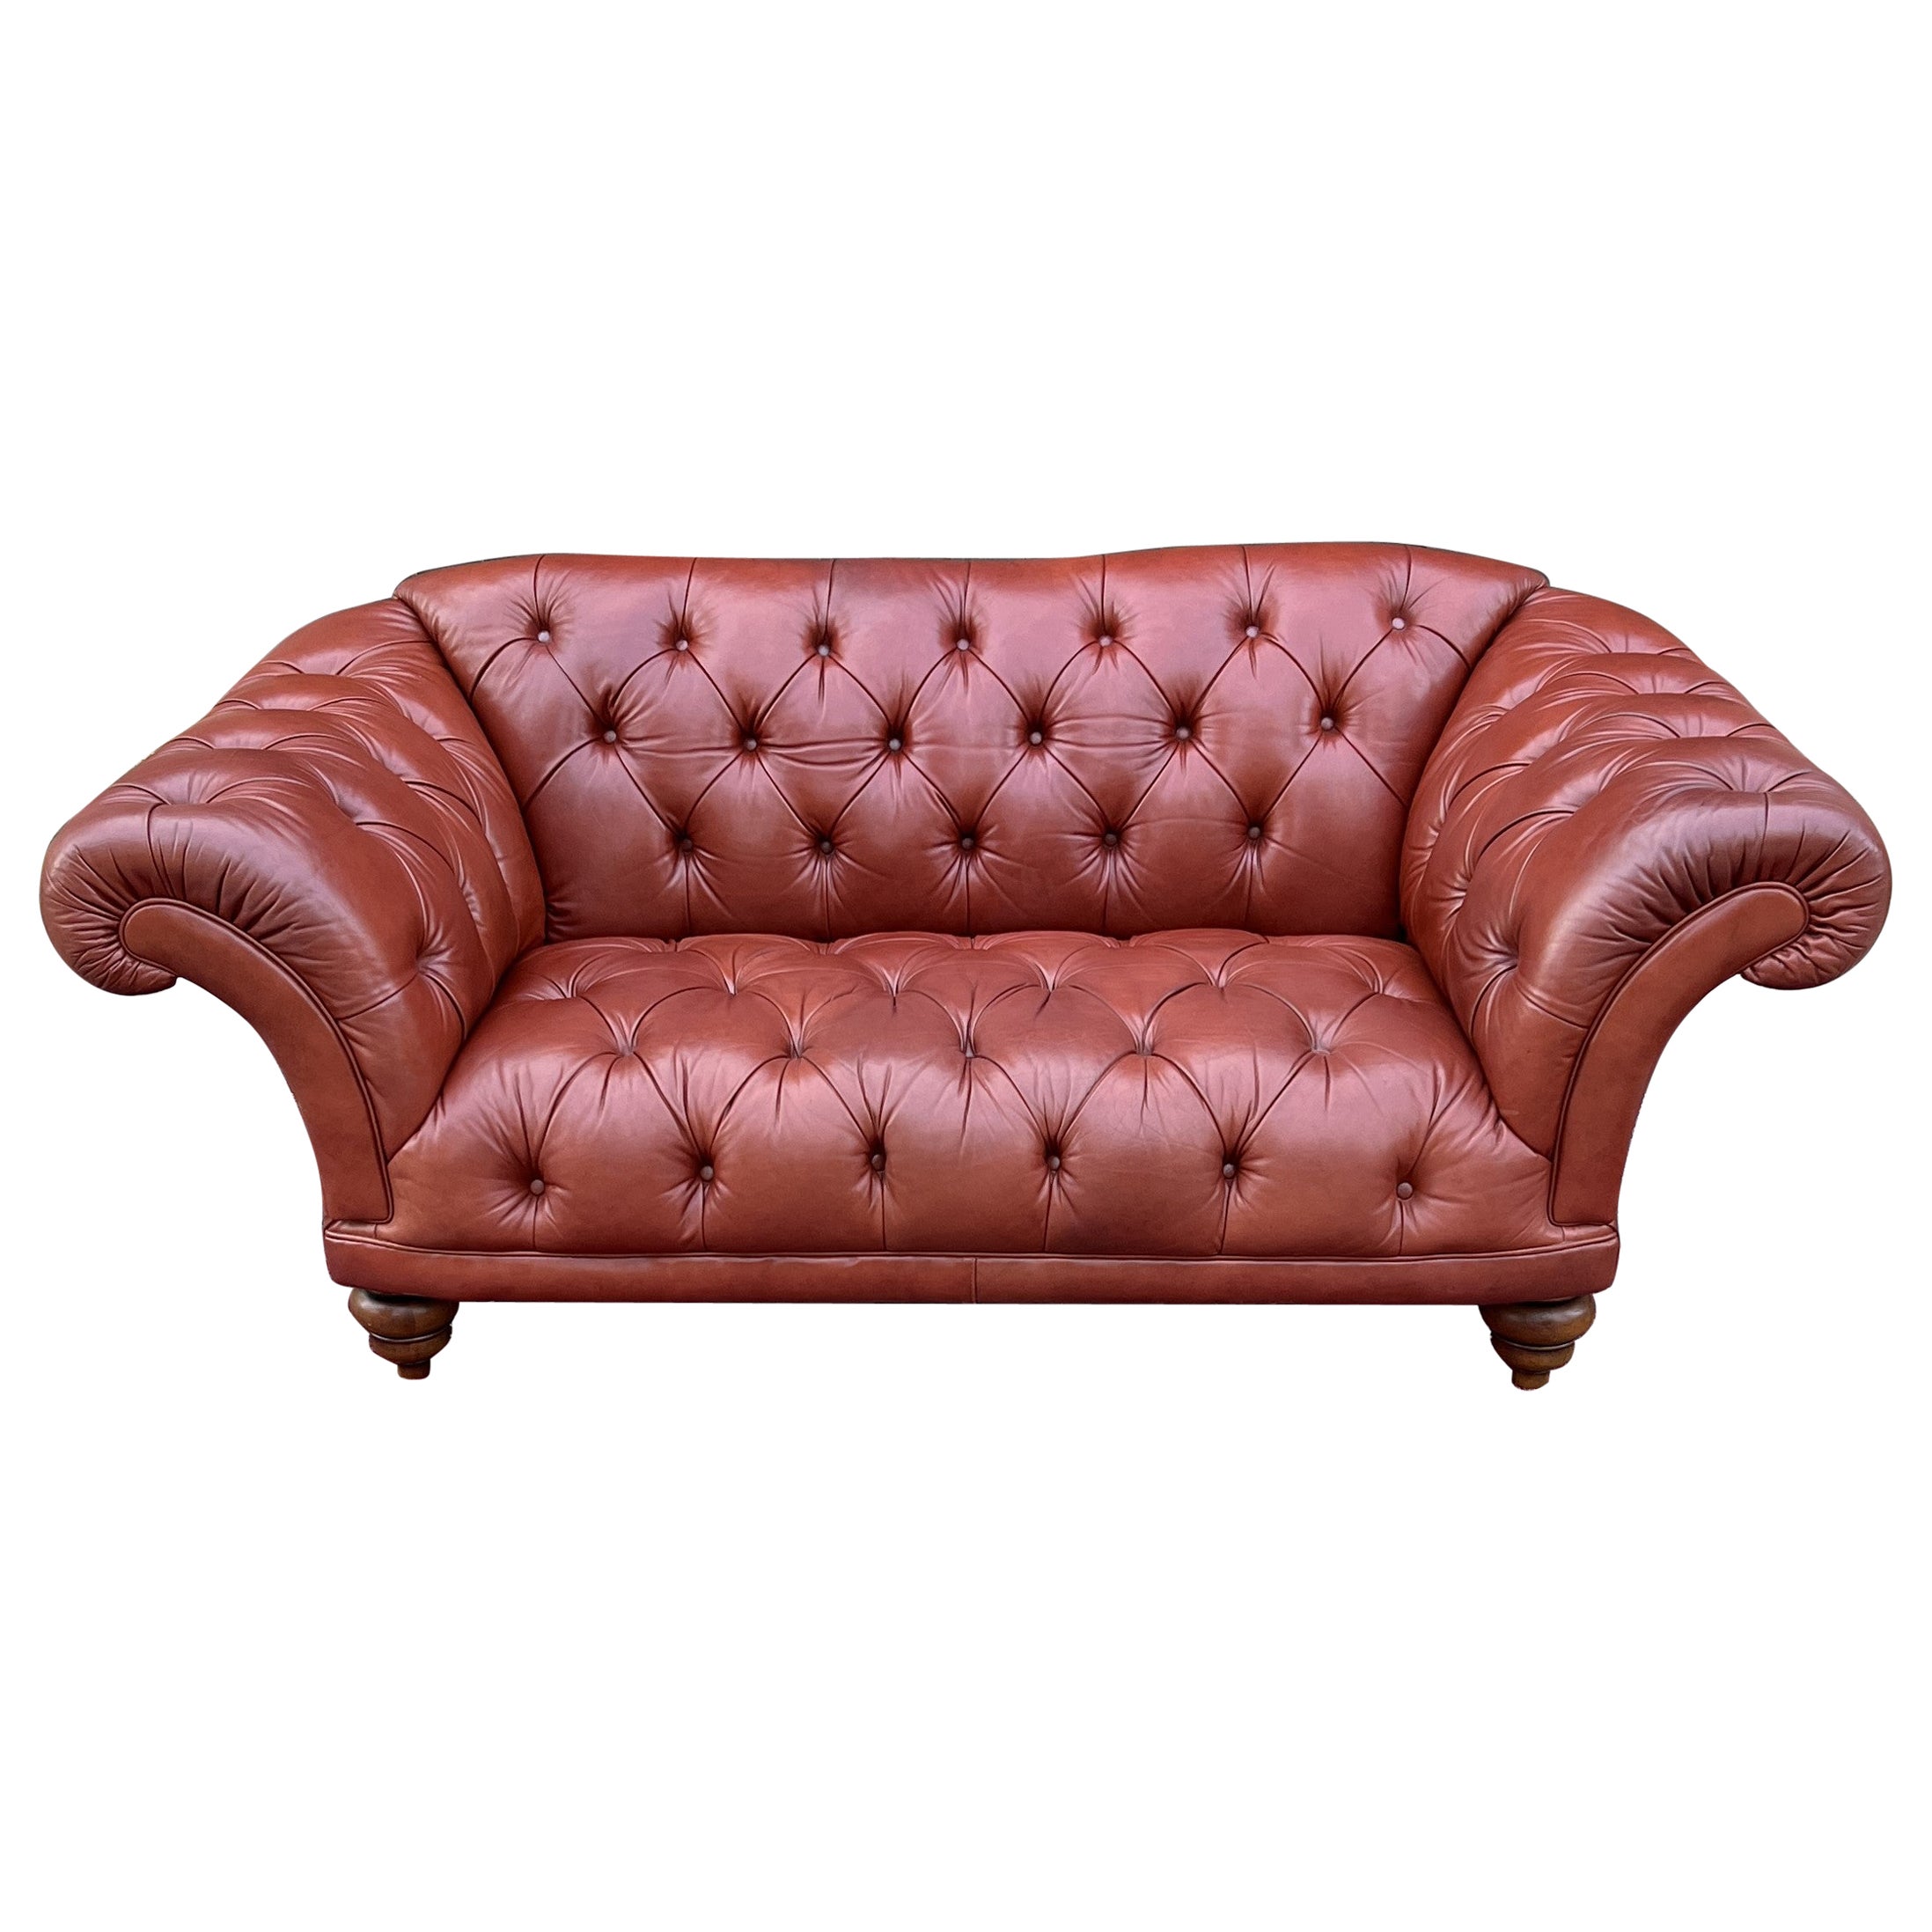 Vintage English Chesterfield Leather Tufted Sofa Brown Terra Cotta Mid Century For Sale